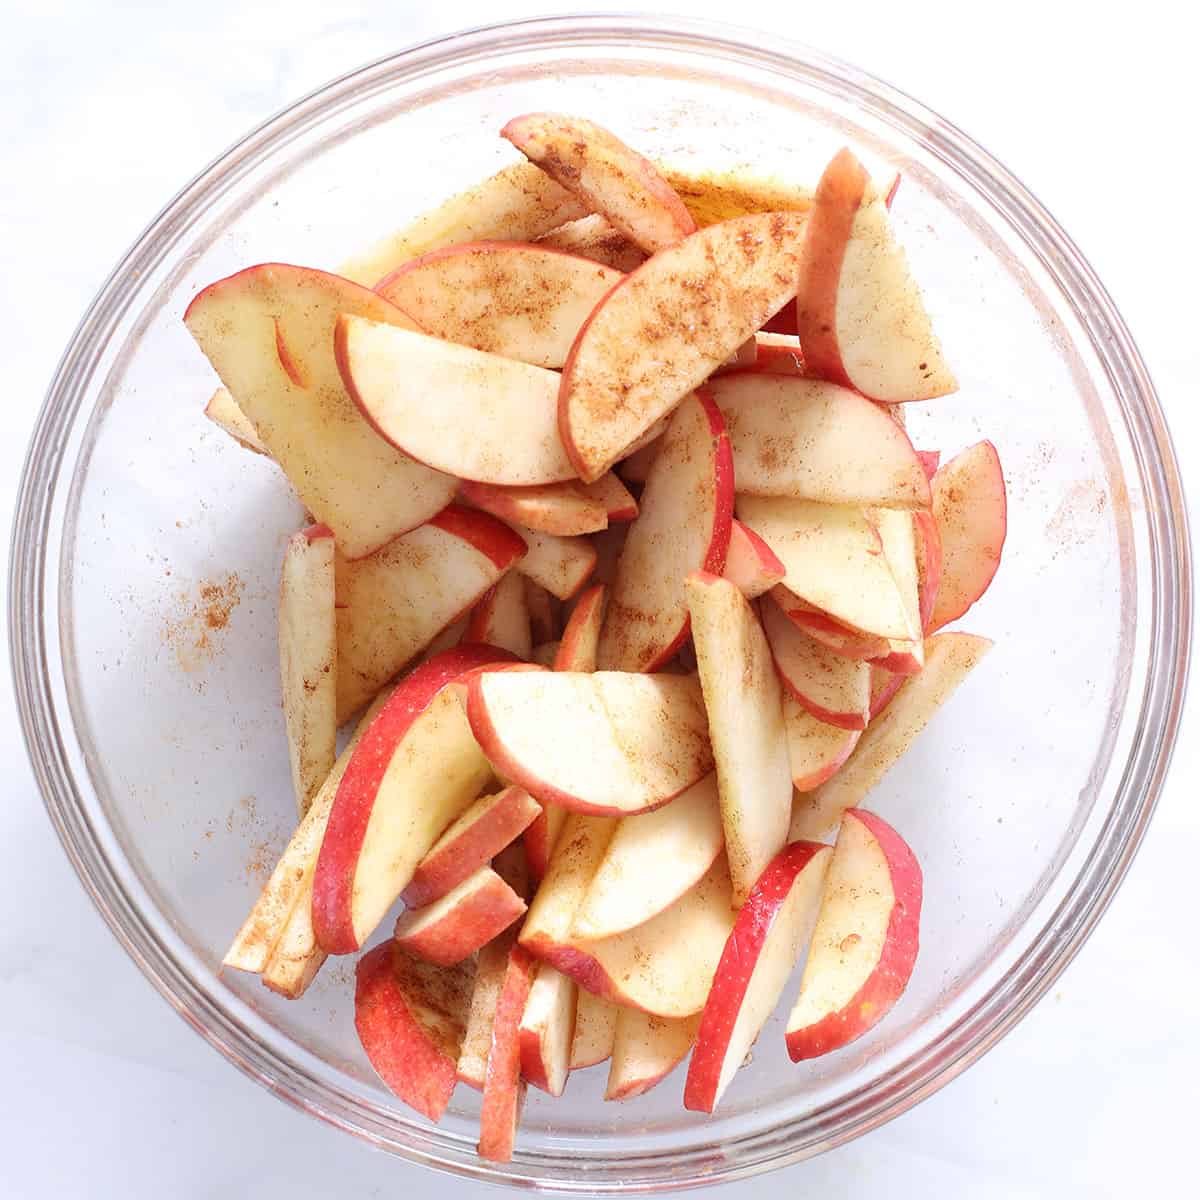 sliced apples with cinnamon in a bowl.